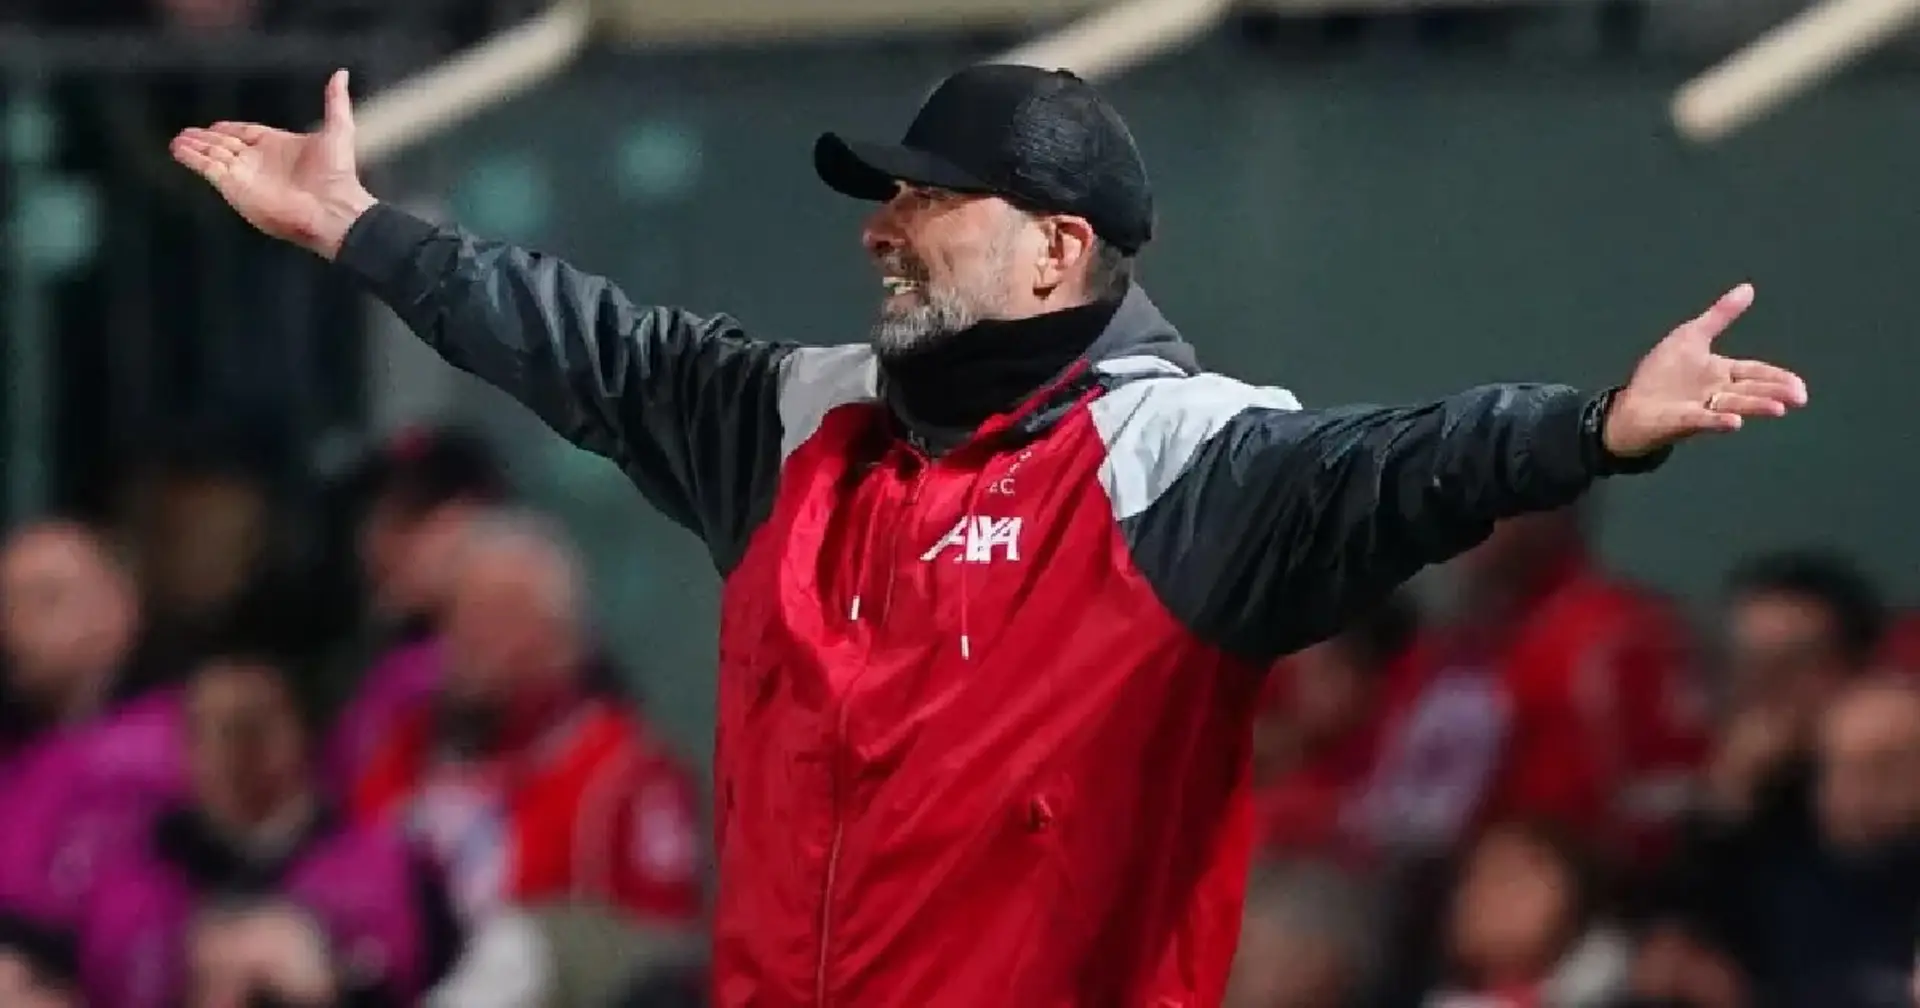 'It is weighing on them': Liverpool told Klopp departure is reason for poor form